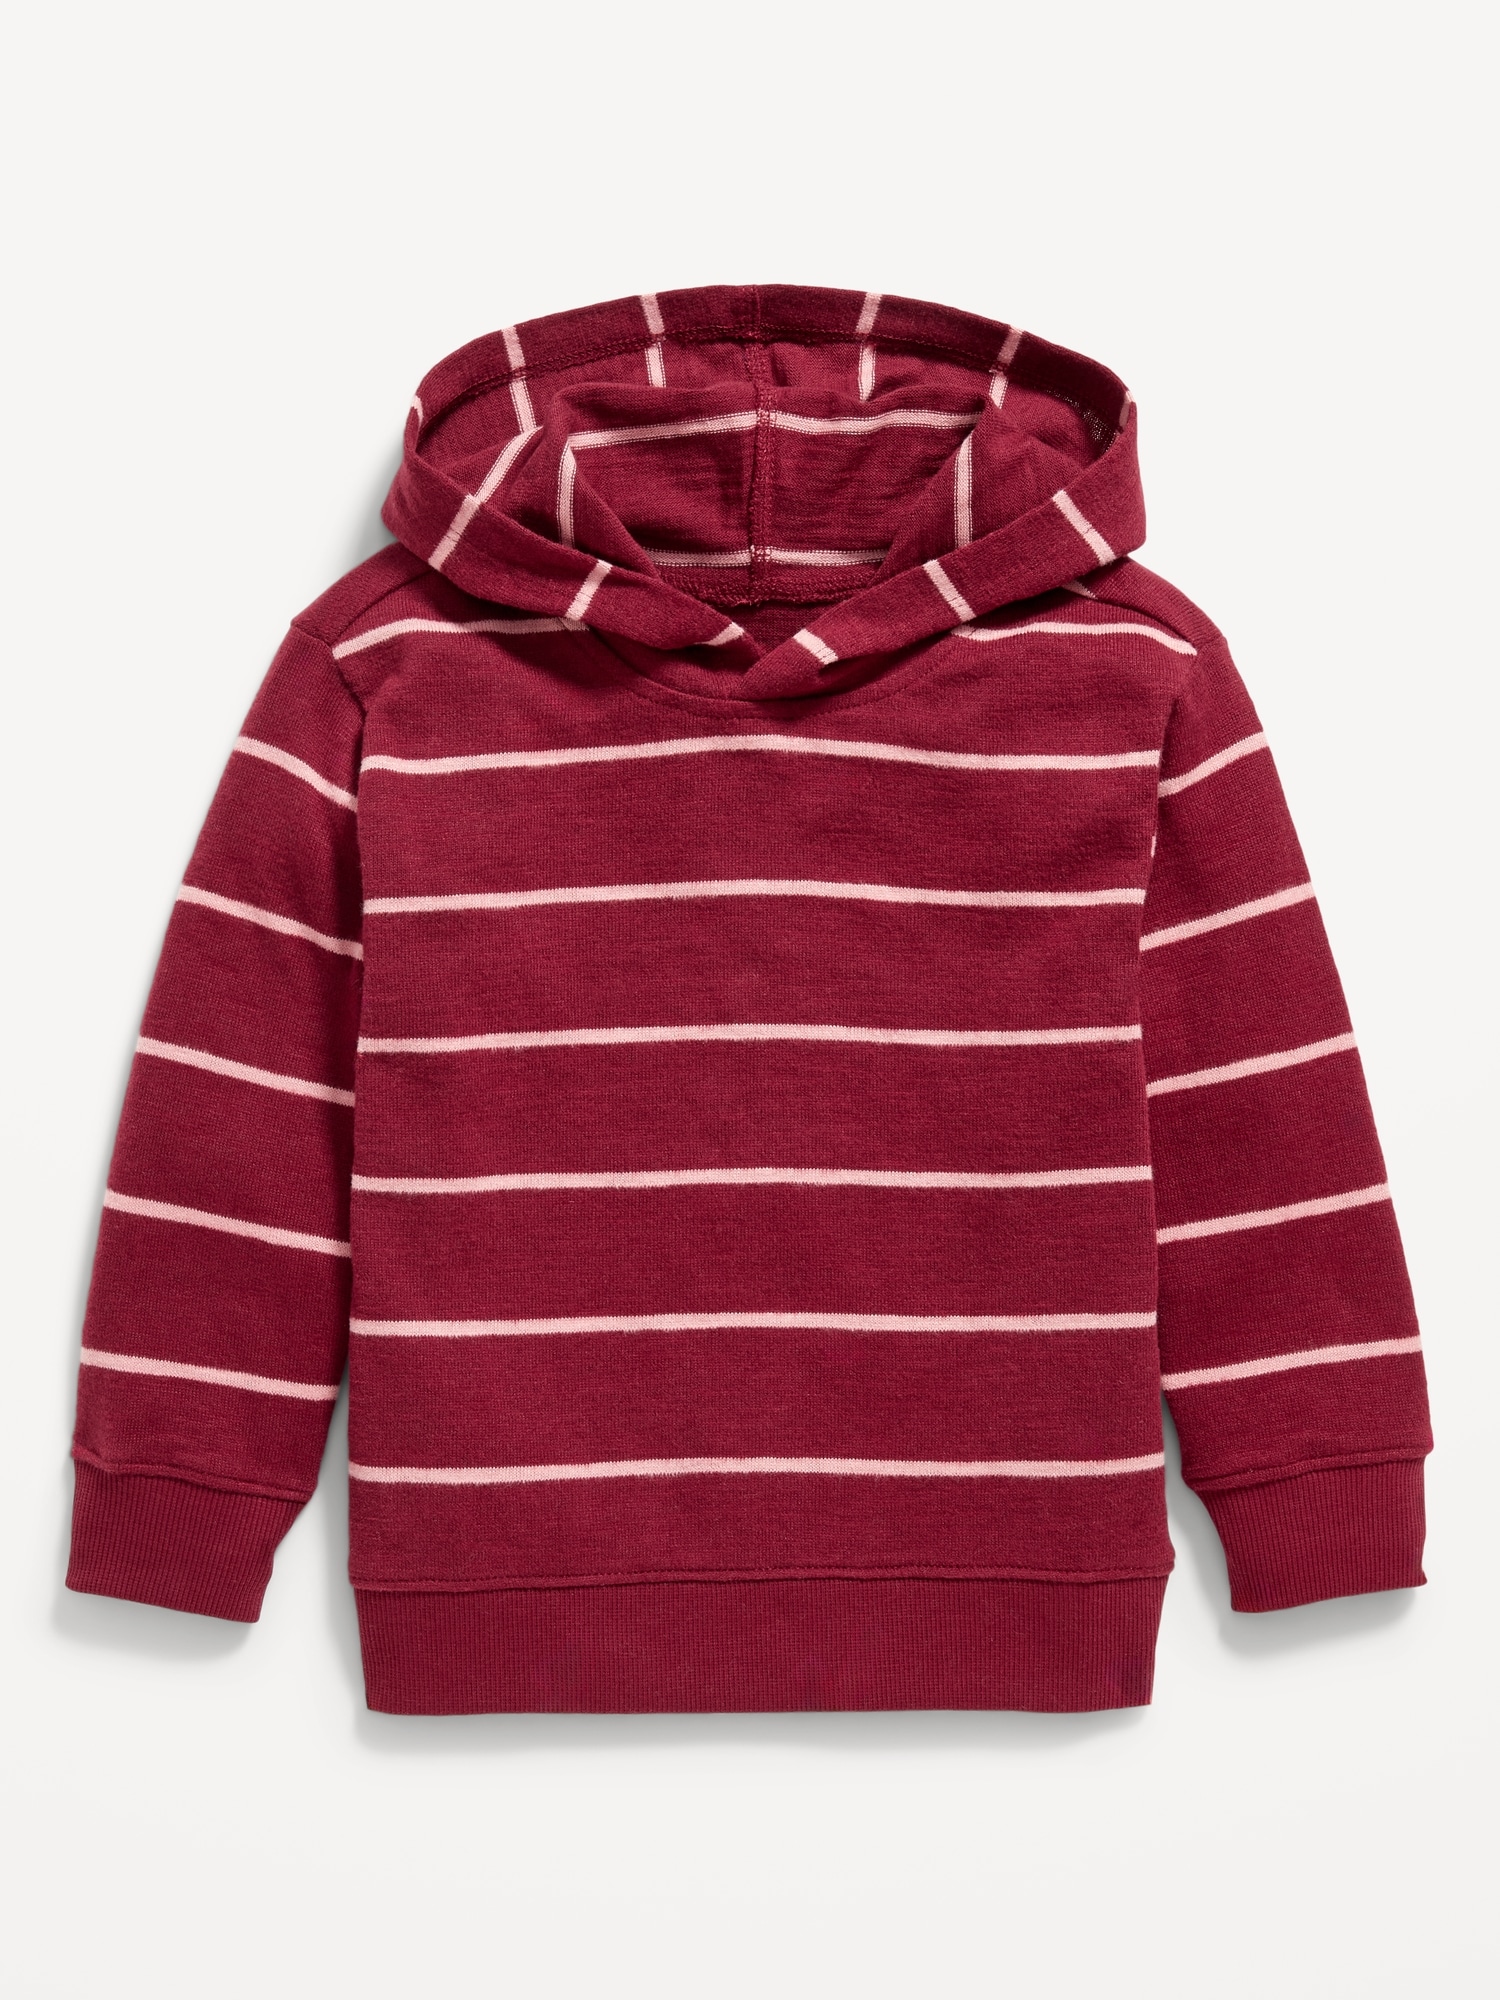 Striped Cozy-Knit Pullover Hoodie for Boys Toddler | Old Navy